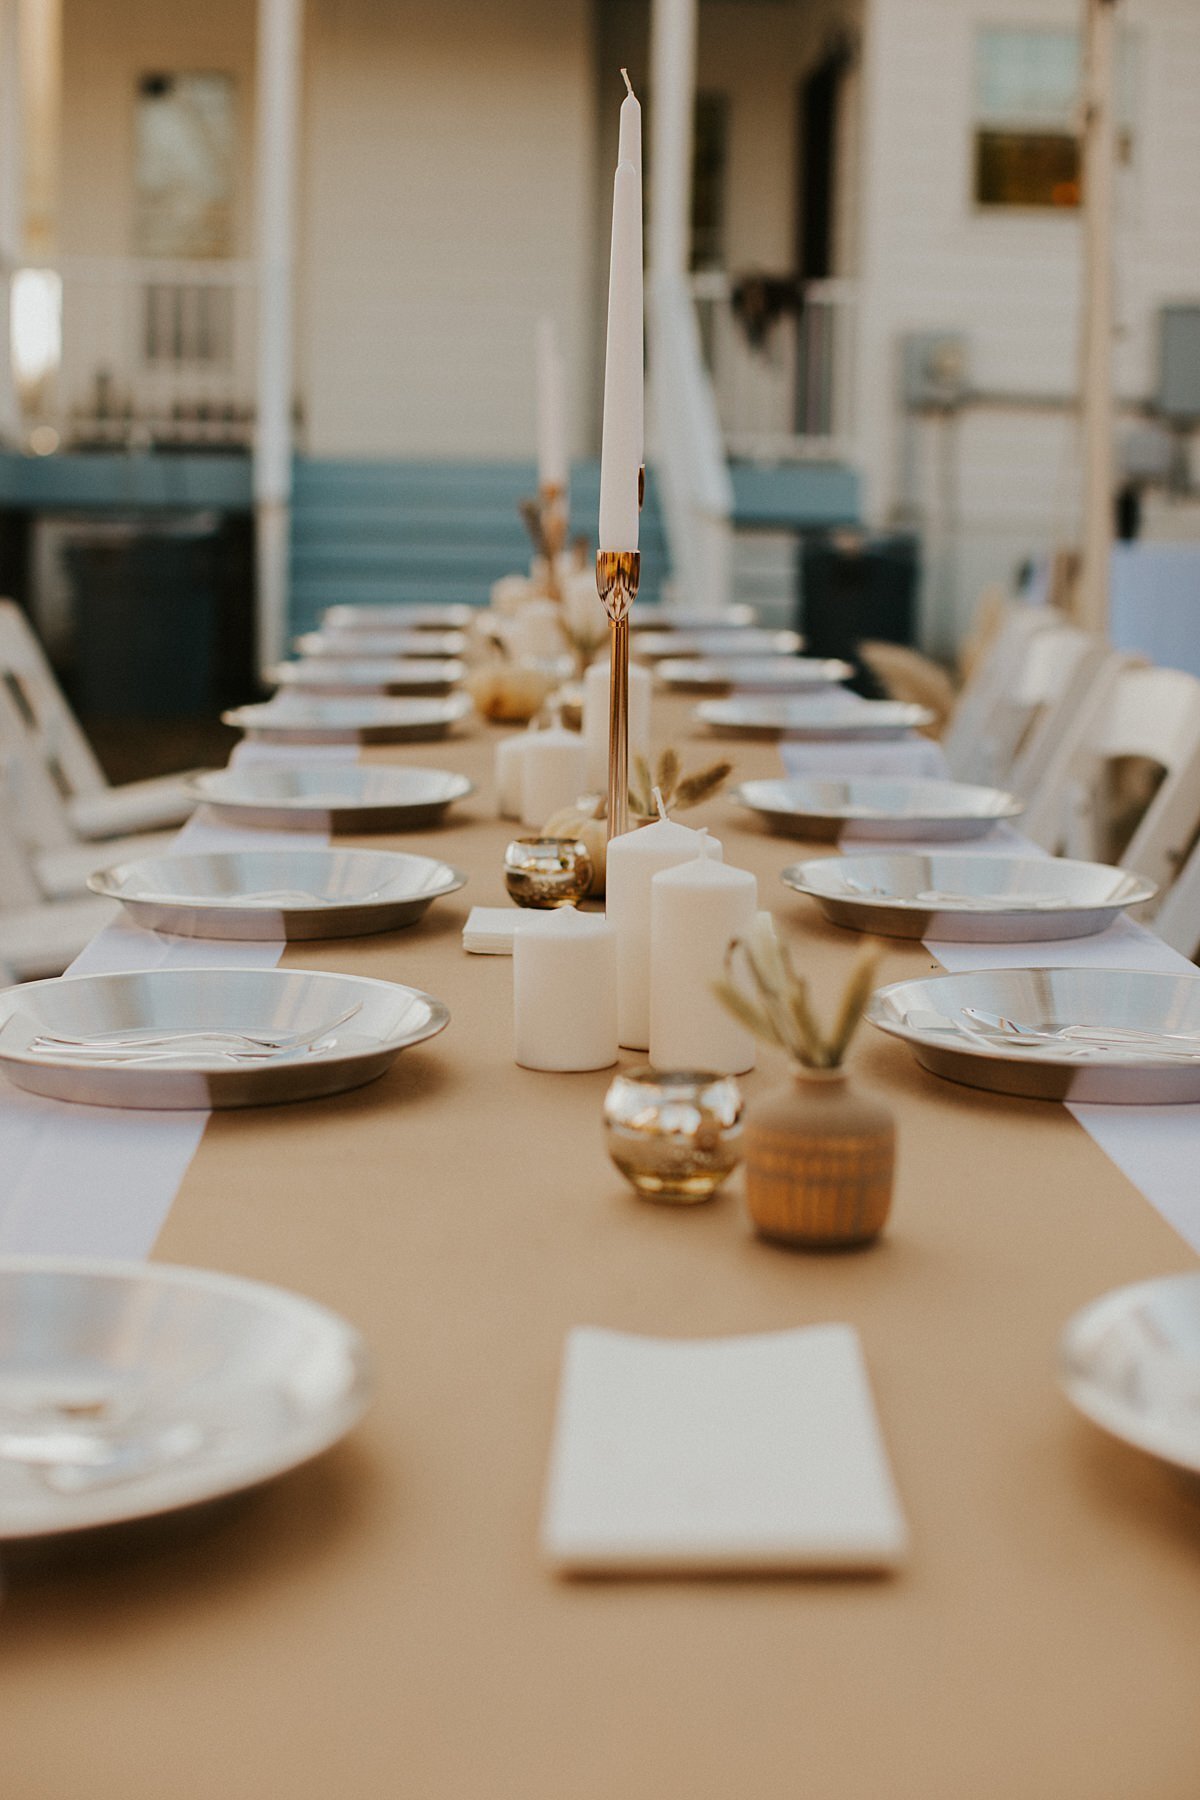 Long family style dinner table with white and gray china plates with a long tan table runner over a white table cloth. The table is decorated with white pillar candles, gold votive candles,  and tall gold candles sticks with white table candles.